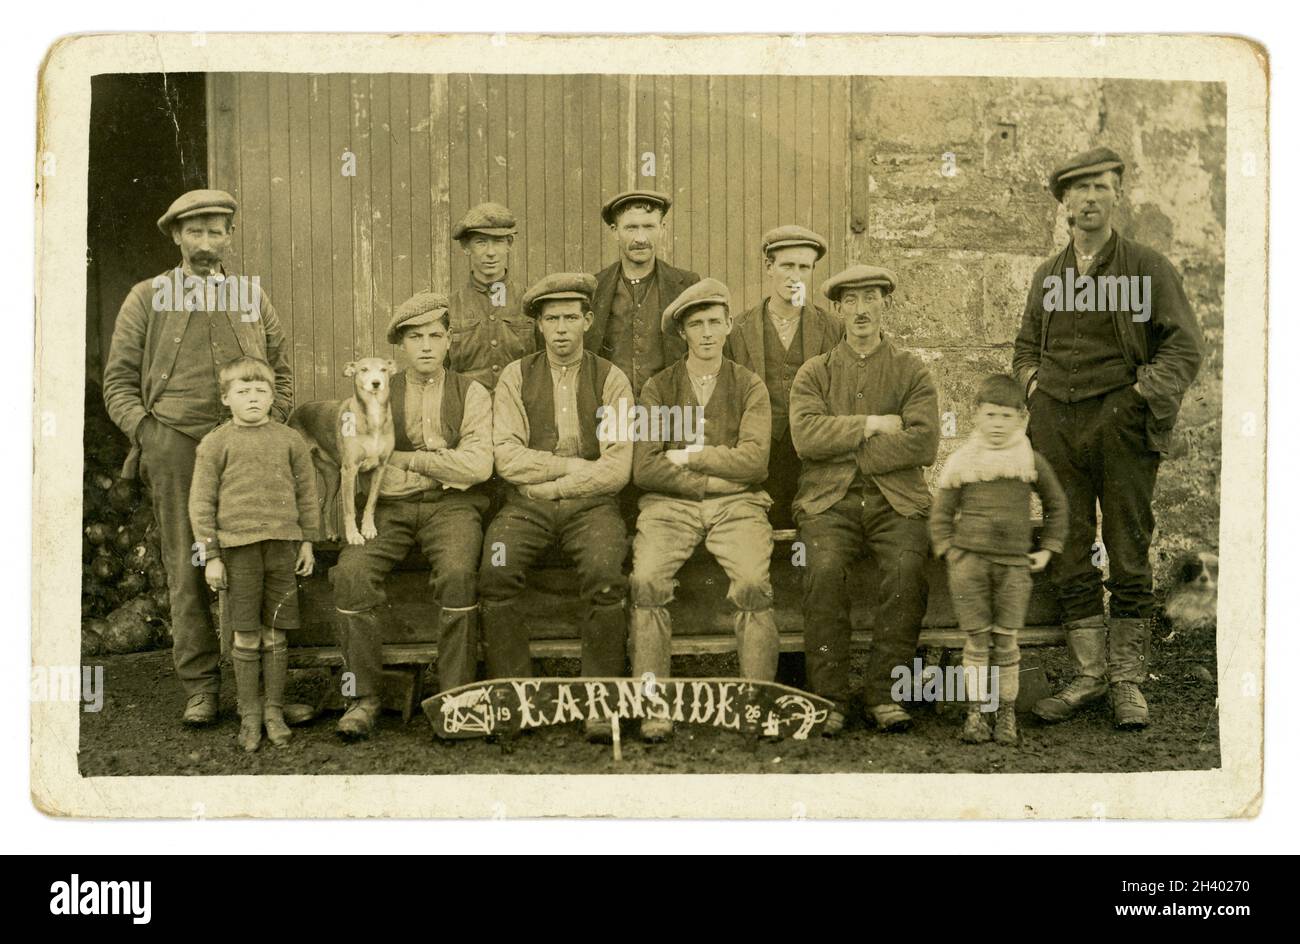 Original early 1920's postcard of stable hands or farm workers - ploughmen, some with their small sons, wearing working clothes - flat caps, waistcoats and trousers tied below knee, boots. Posing for a group photo outside a barn building or stables with a dog. They appear to be working for a large landowner. They could possibly be working with Clydesdale draught horses for ploughing  At their feet is a wooden sign dated 1926, which also has Earnside, a horseshoe, whip and horse drawn on it. Possibly a celebration or anniversary. Located near the river Earn, Perth, Central Scotland, U.K. Stock Photo